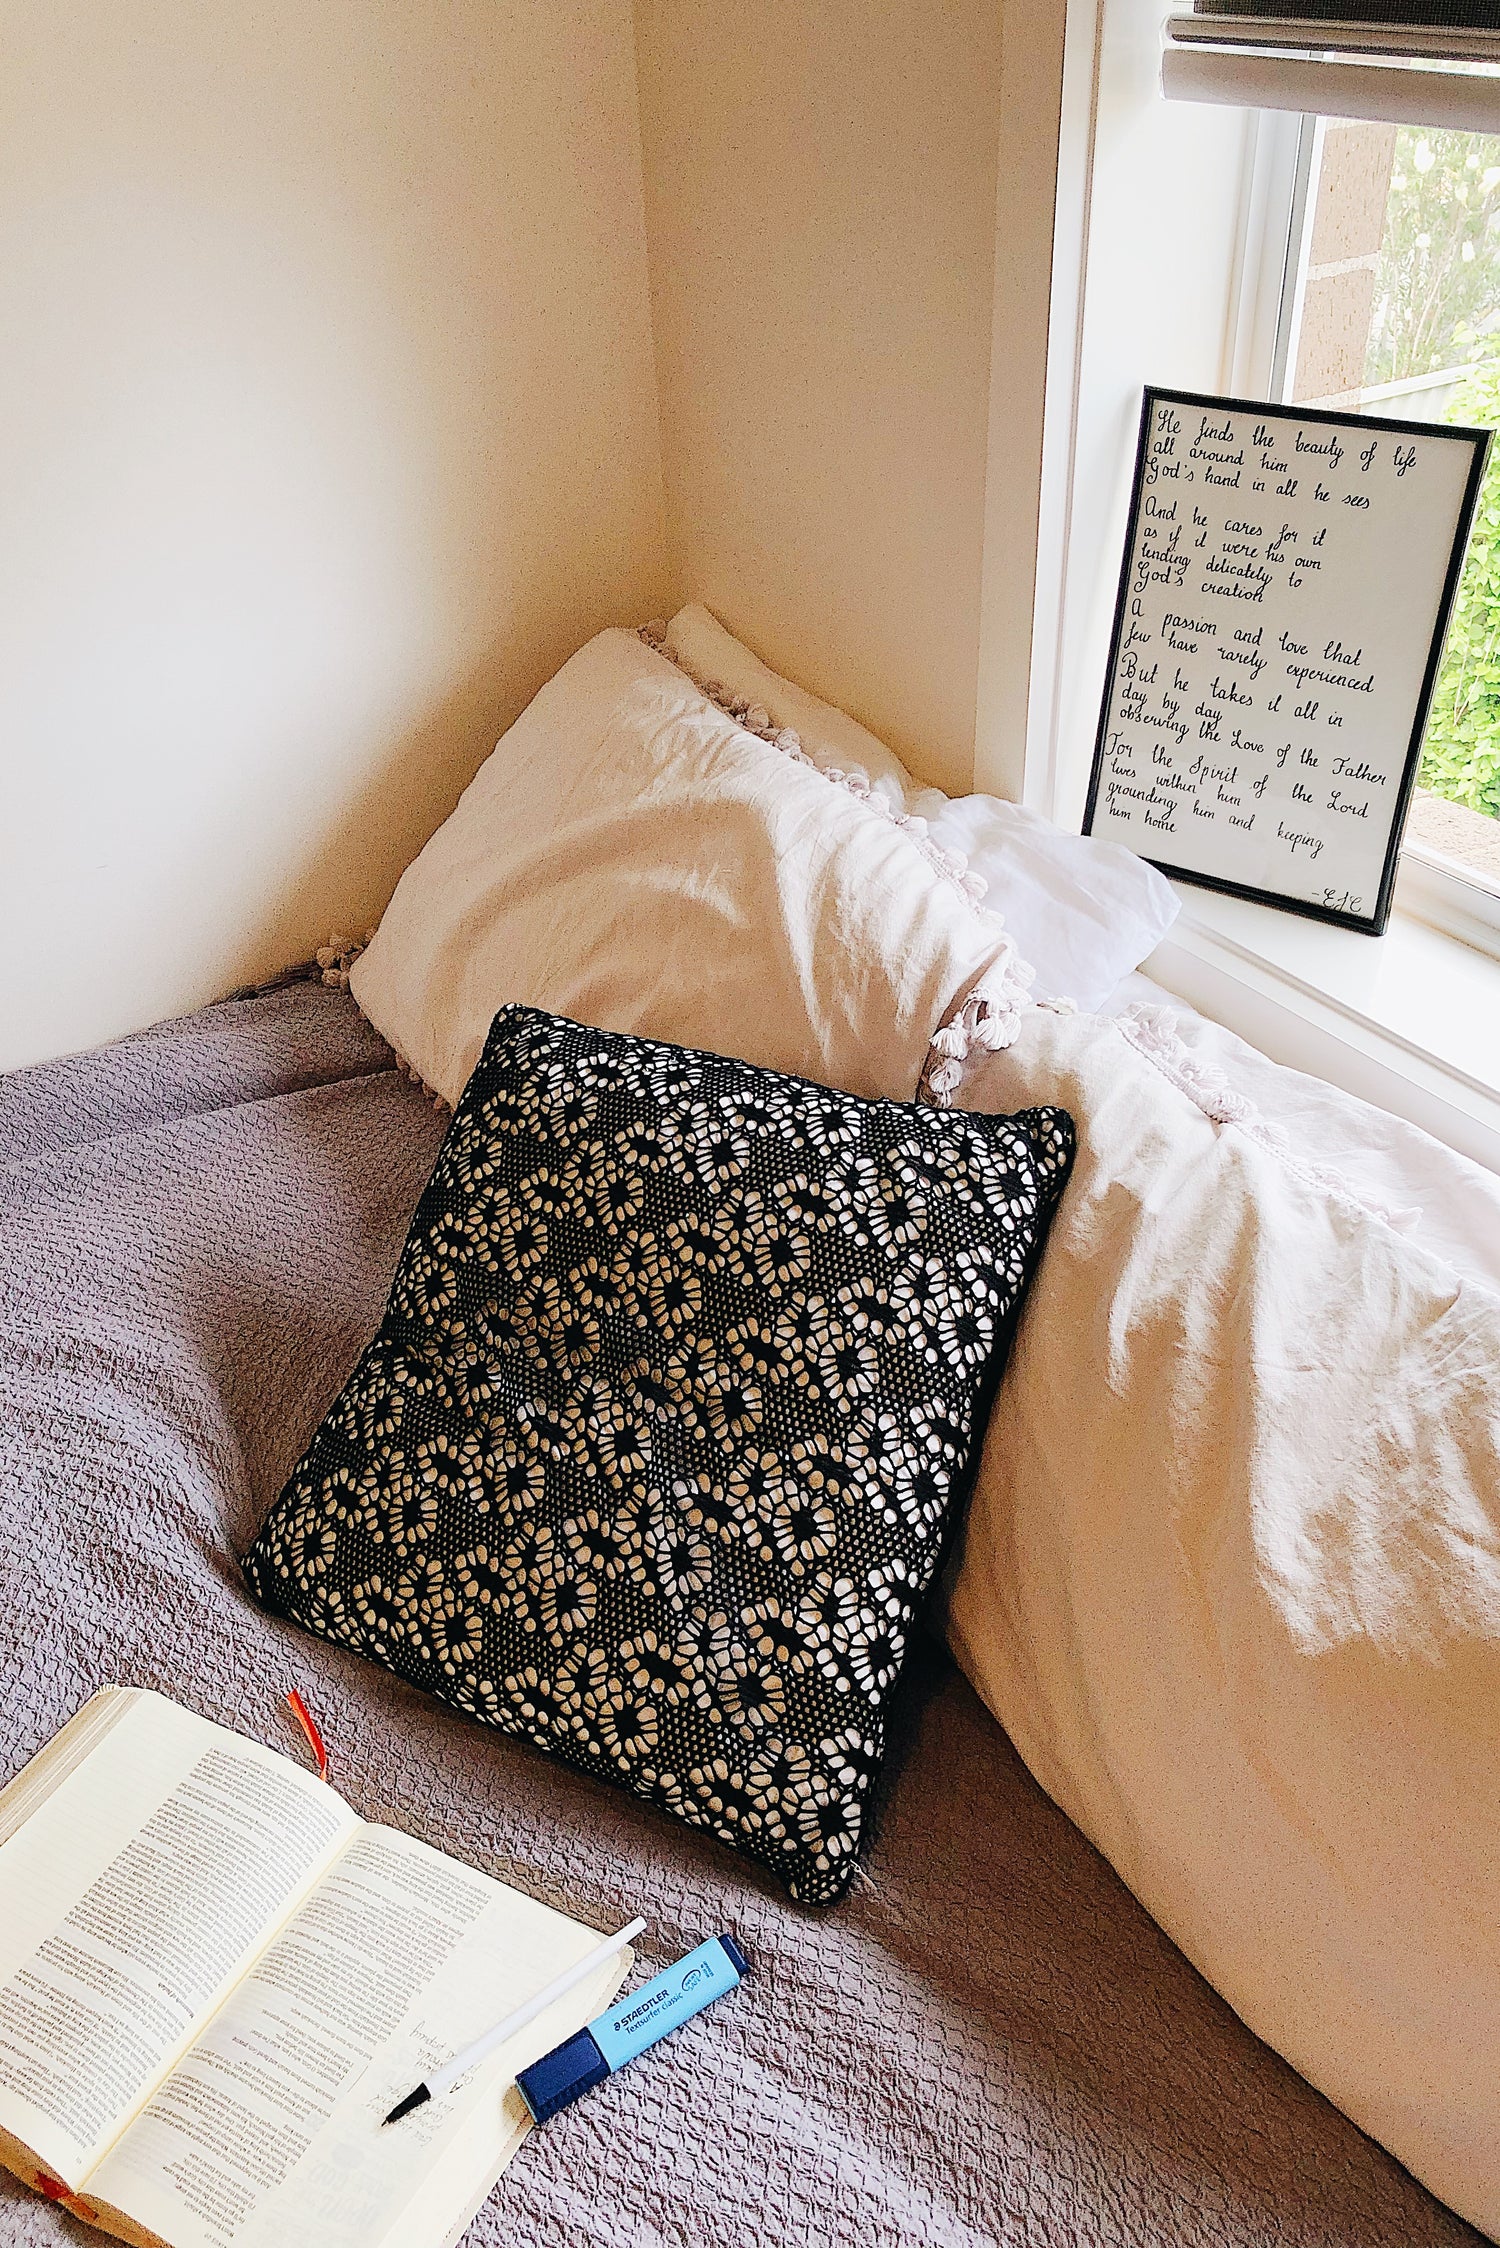 prophetic poem on window sill, bible open on bed